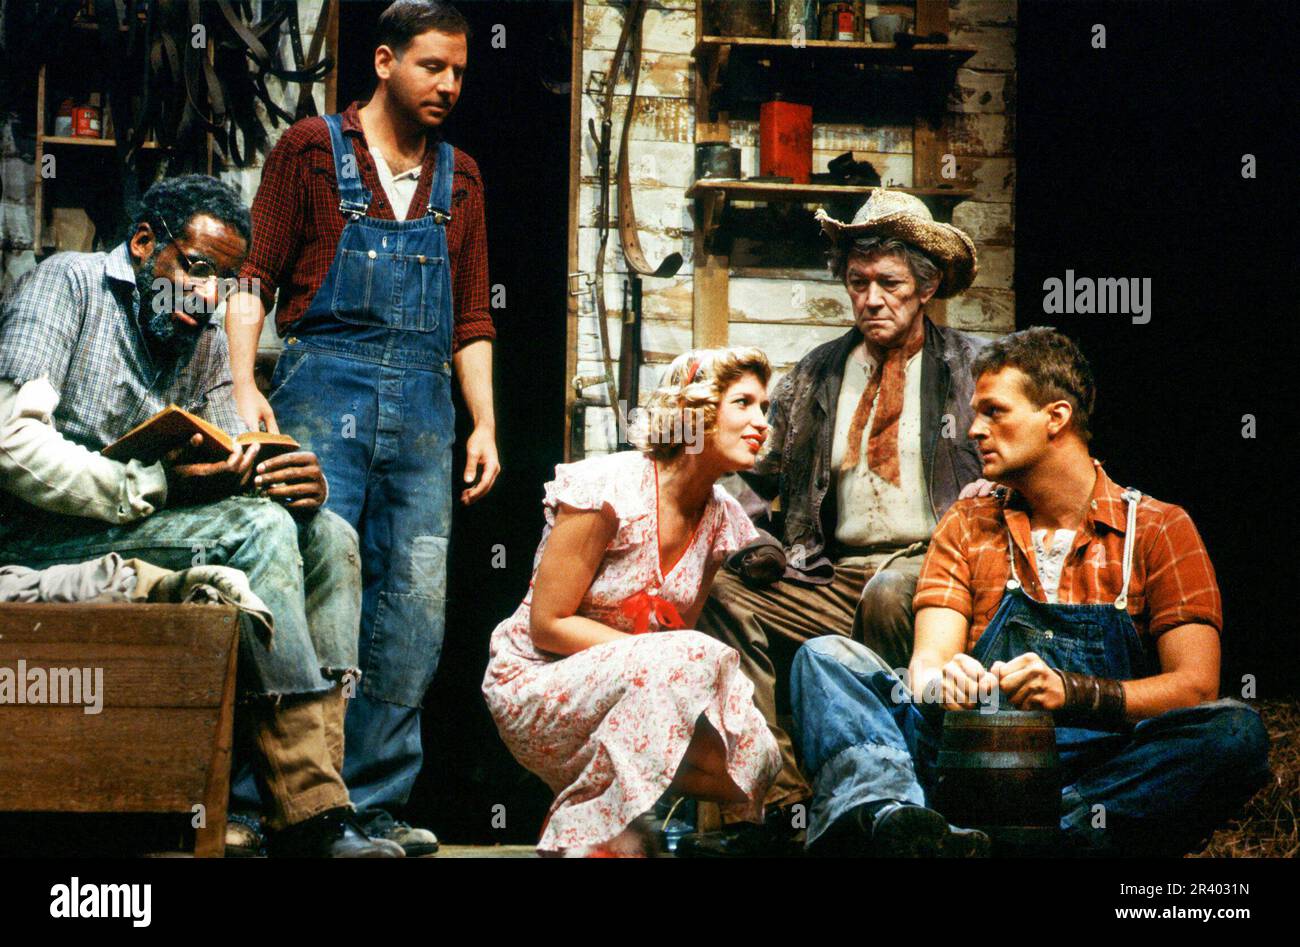 l-r: Calvin Simpson (Crooks), Lou Hirsch (George), Susan Penhaligon (Curley's Wife), Francis Drake (Candy), Clive Mantle (Lennie) in OF MICE AND MEN by John Steinbeck at the Mermaid Theatre, London EC4  11/1984  set design: Sean Cavanagh  costumes: Sarah-Jane McClelland  lighting: Stanley Osborne-White  fights: Peter Woodward  director: Geoff Bullen Stock Photo